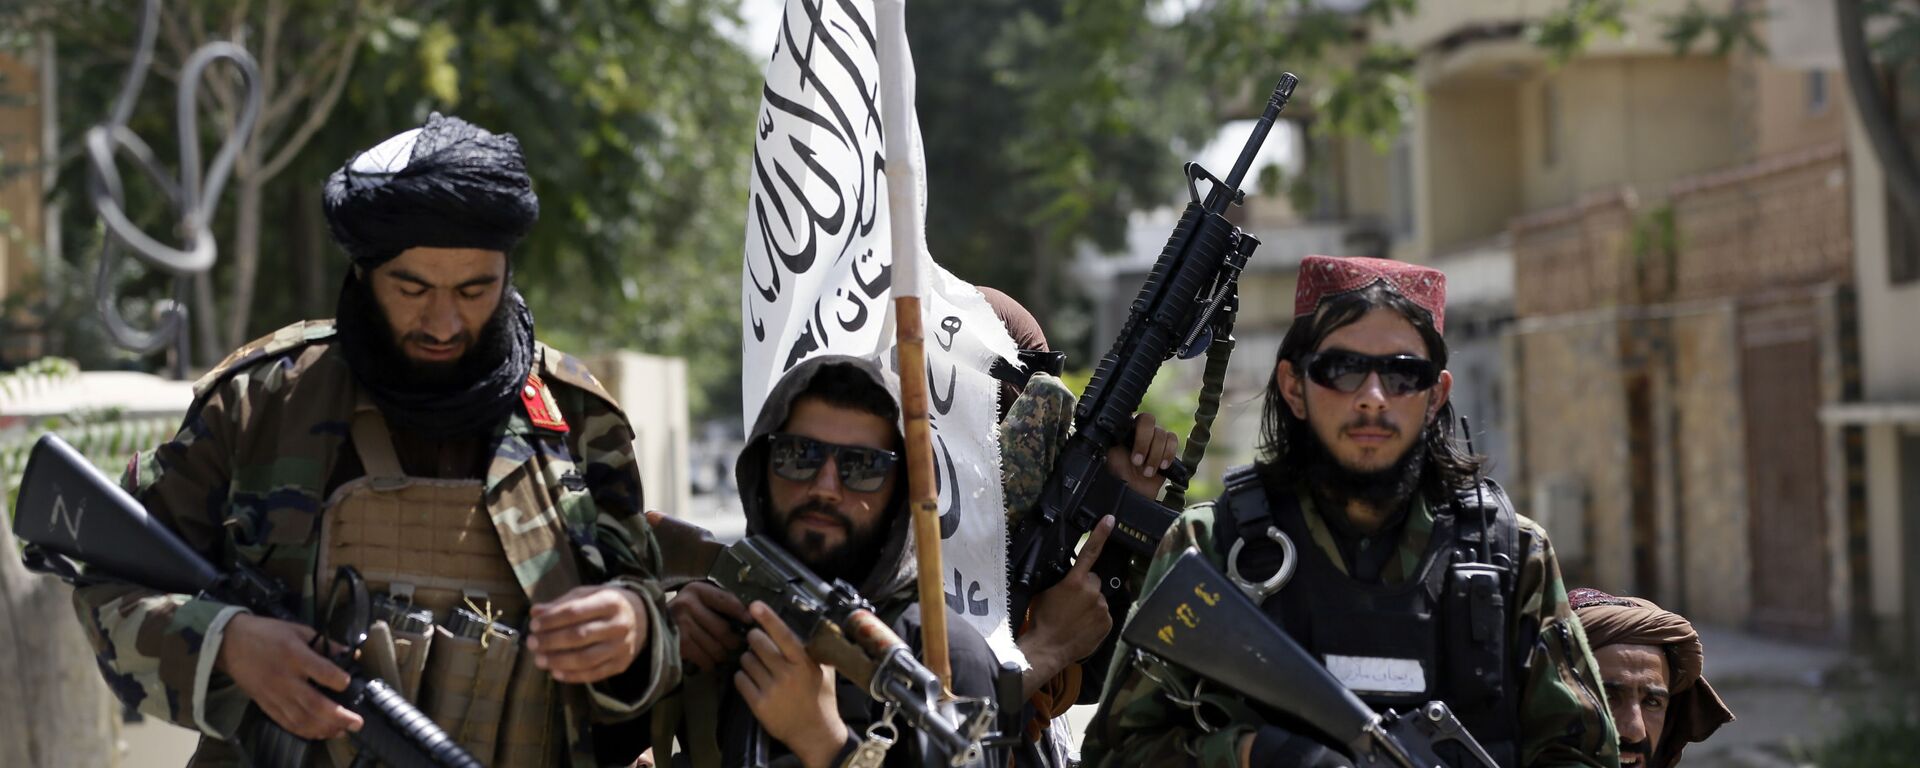 In this Aug. 19, 2021 file photo, Taliban fighters display their flag on patrol in Kabul, Afghanistan. When U.S. President Joe Biden took office early this year, Western allies were falling over themselves to welcome and praise him and hail a new era in trans-Atlantic cooperation. - Sputnik International, 1920